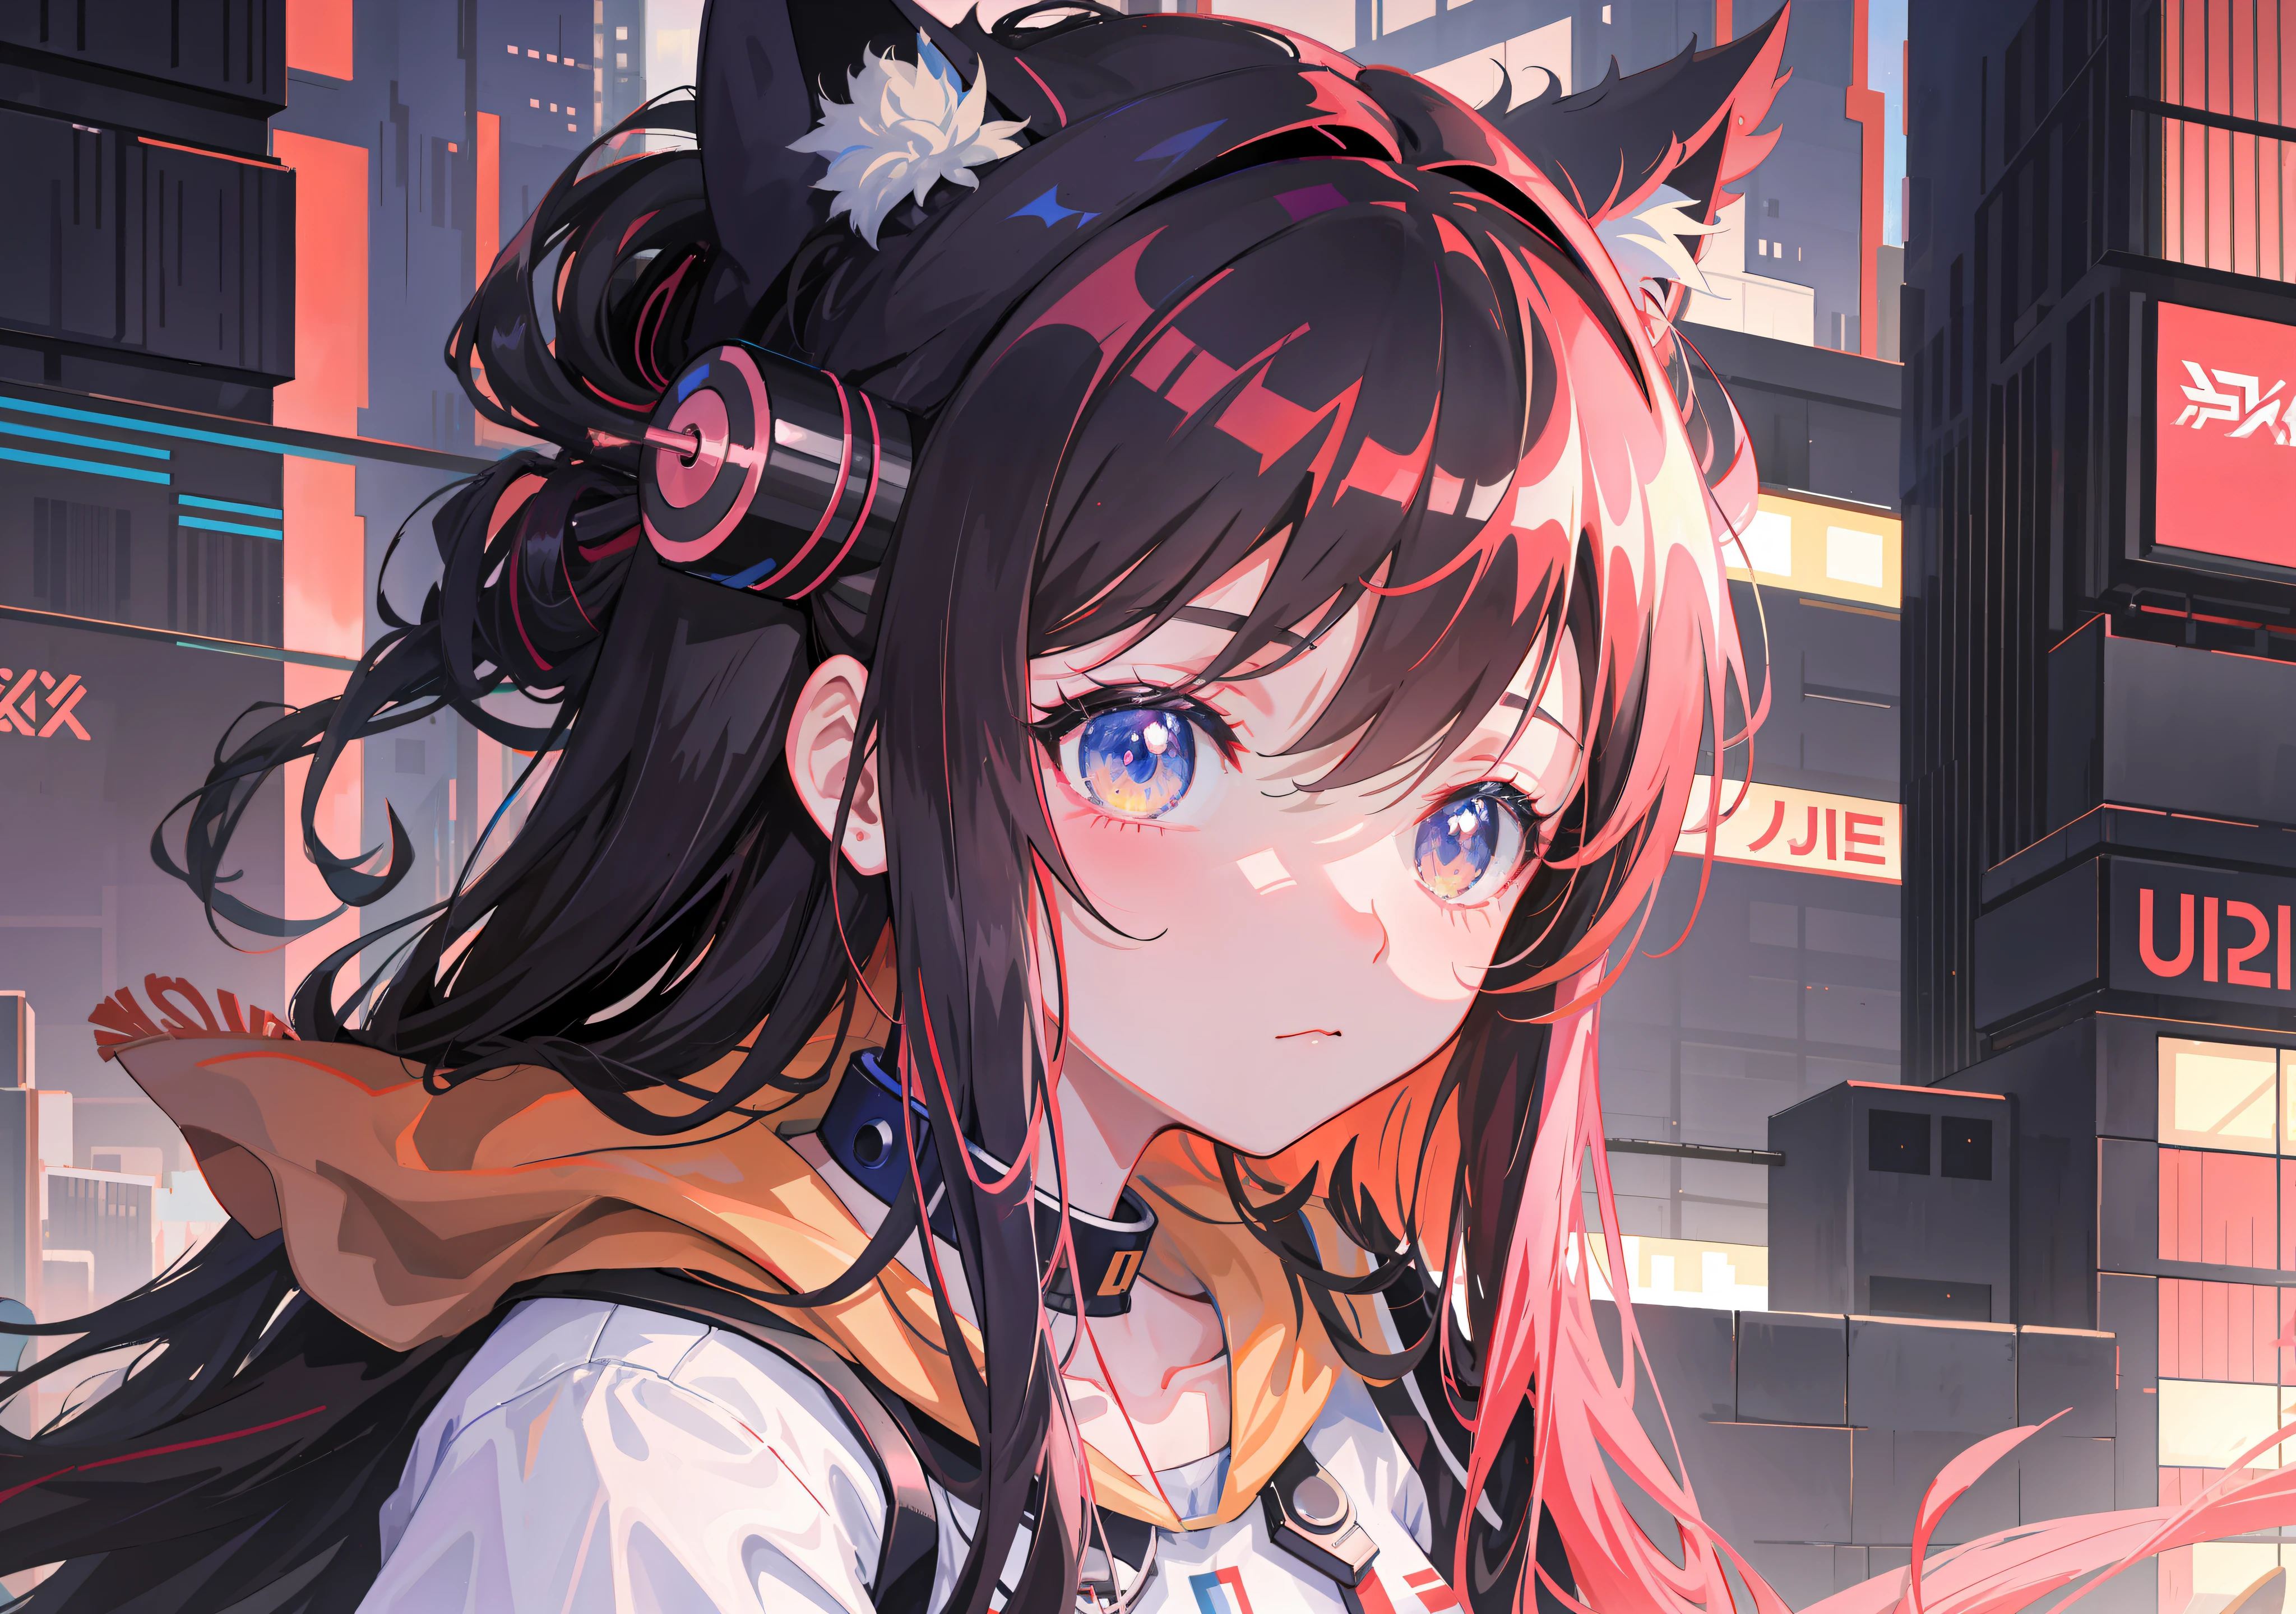 Anime girl with long hair and cat ears in the city, anime style 4 K, from Ark Night, best anime 4k konachan wallpaper, anime girl with cat ears, cyberpunk anime girl mecha, cyberpunk anime girl, digital cyberpunk anime art, anime cyberpunk art, totally robot!! Catwoman, Badass Anime 8 K, Detailed Digital Anime Art, Cute Anime Style, Splash Anime Art, Pixiv, Best Quality, Ultra HD